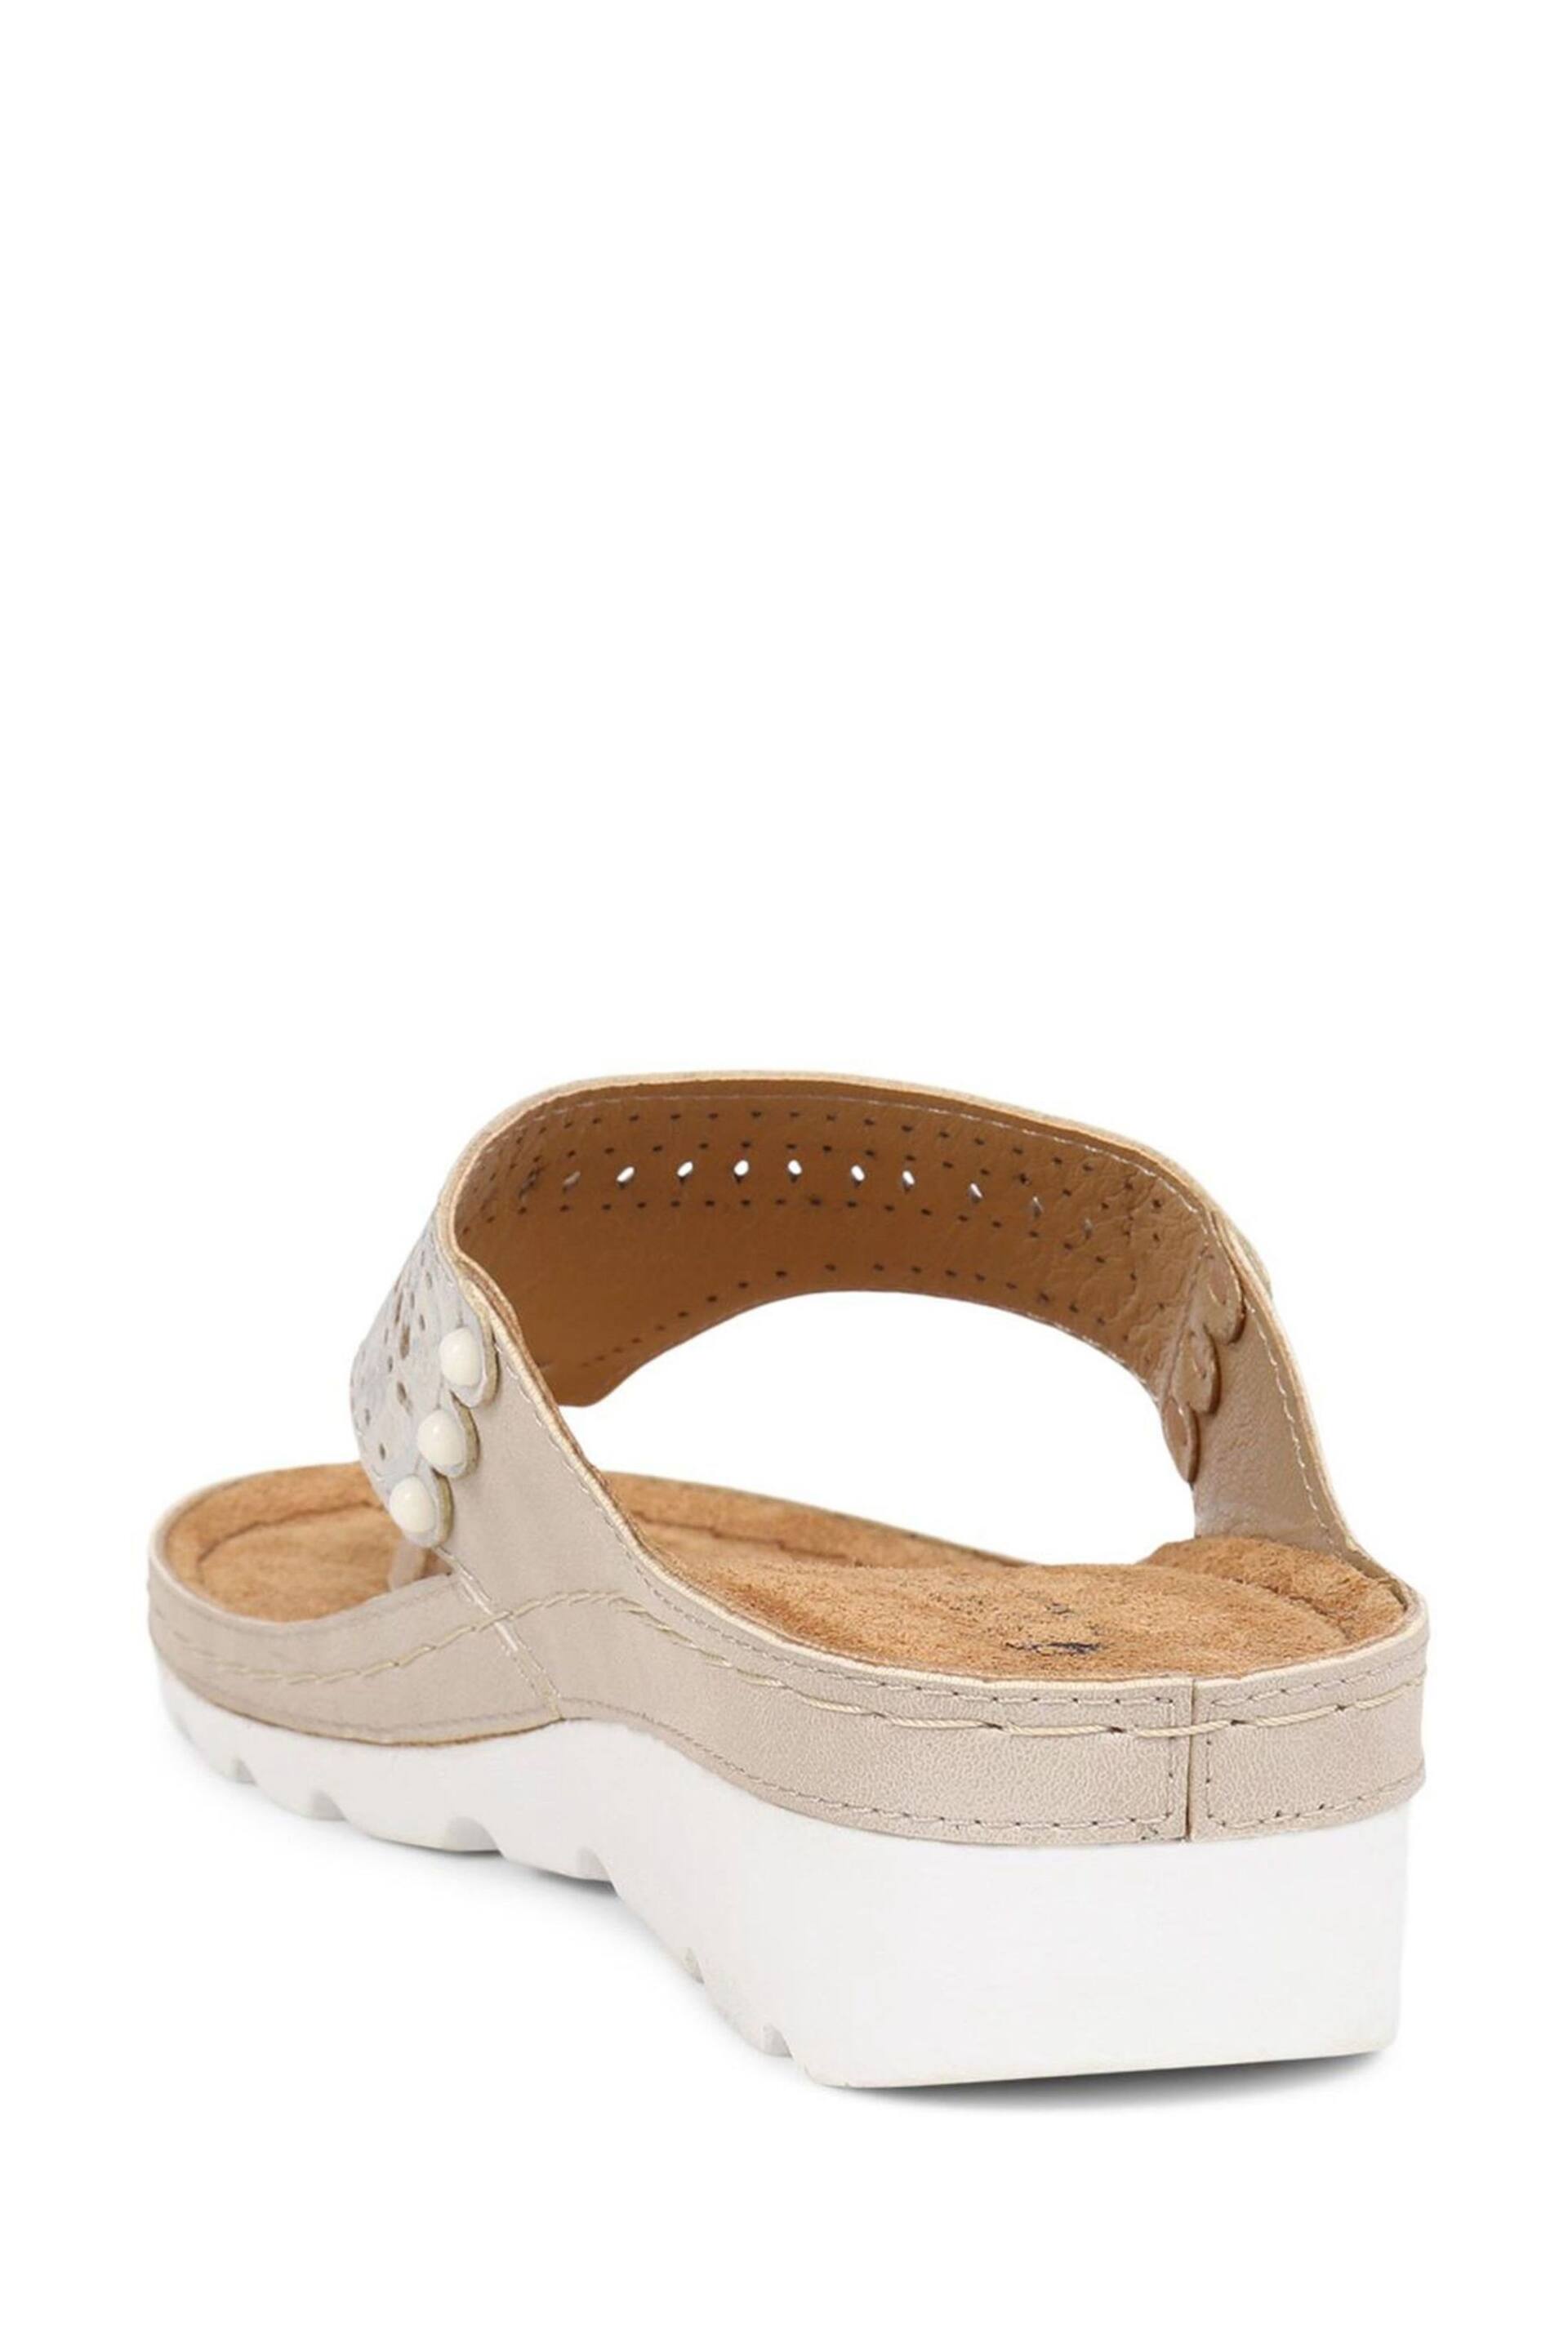 Pavers Natural Leather T Bar Sandals - Image 2 of 5